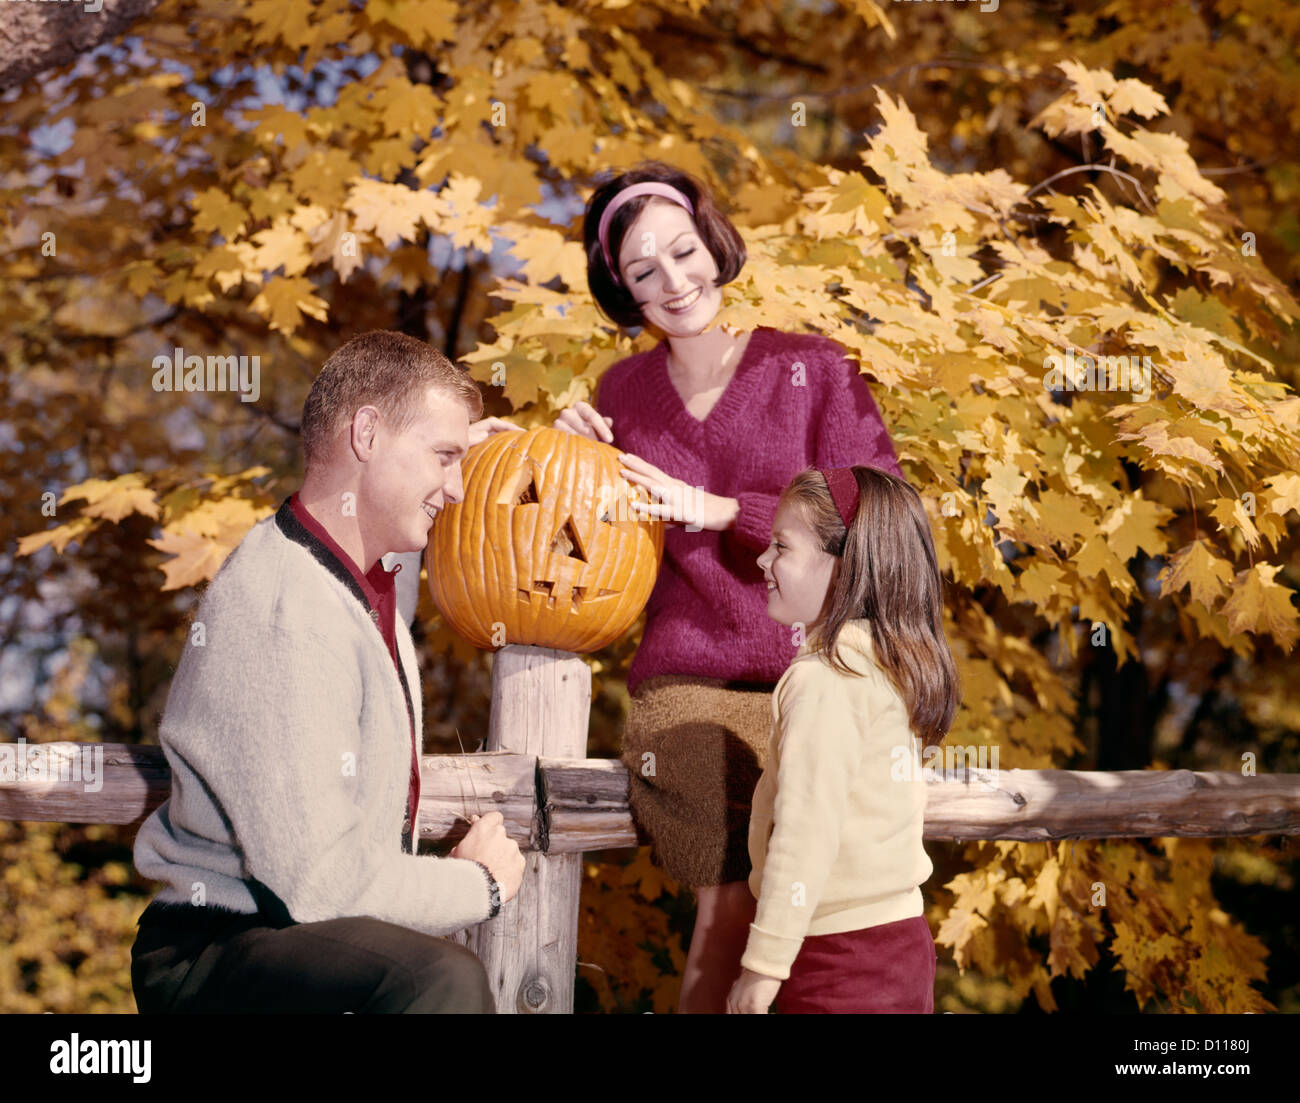 1960s JACK-O'-LANTERN PUMPKIN FAMILY MOTHER FATHER DAUGHTER GIRL FENCE AUTUMN FALL Stock Photo